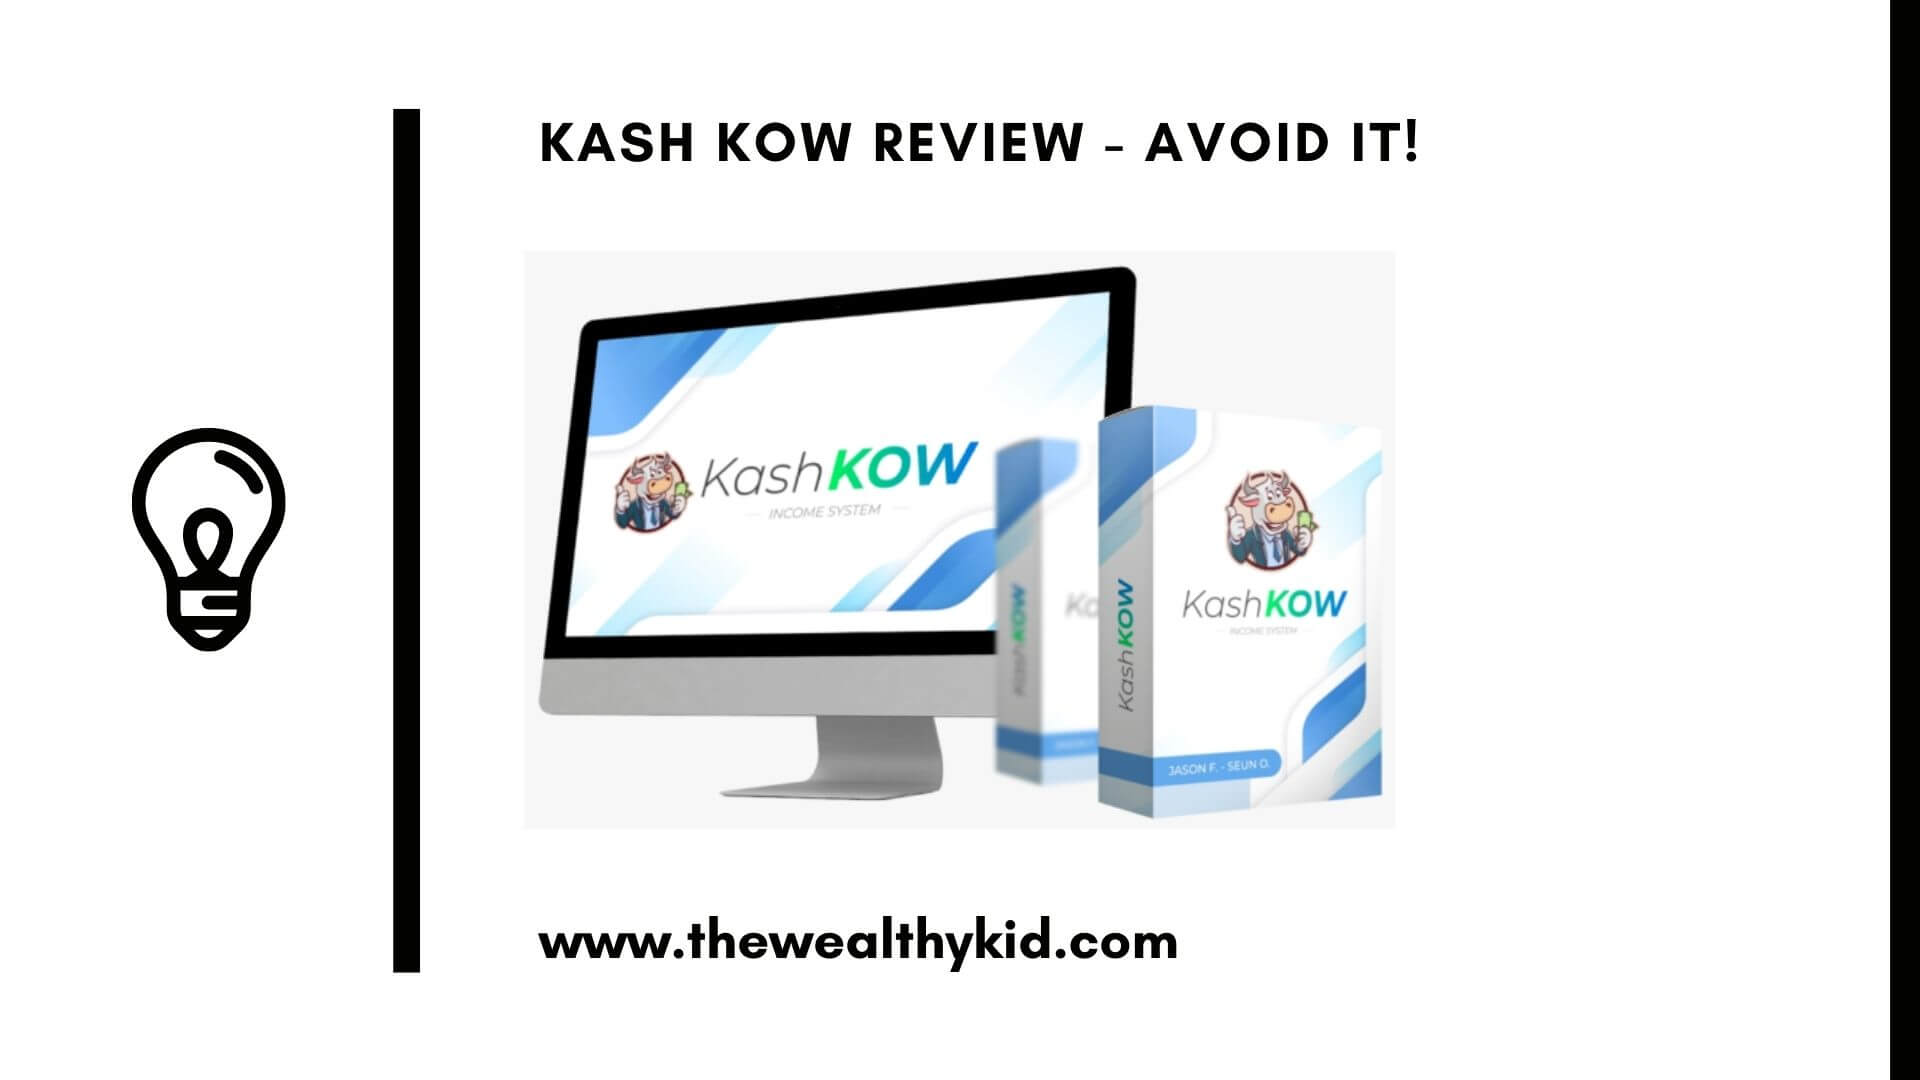 What is Kash Kow? Another Shiny Object